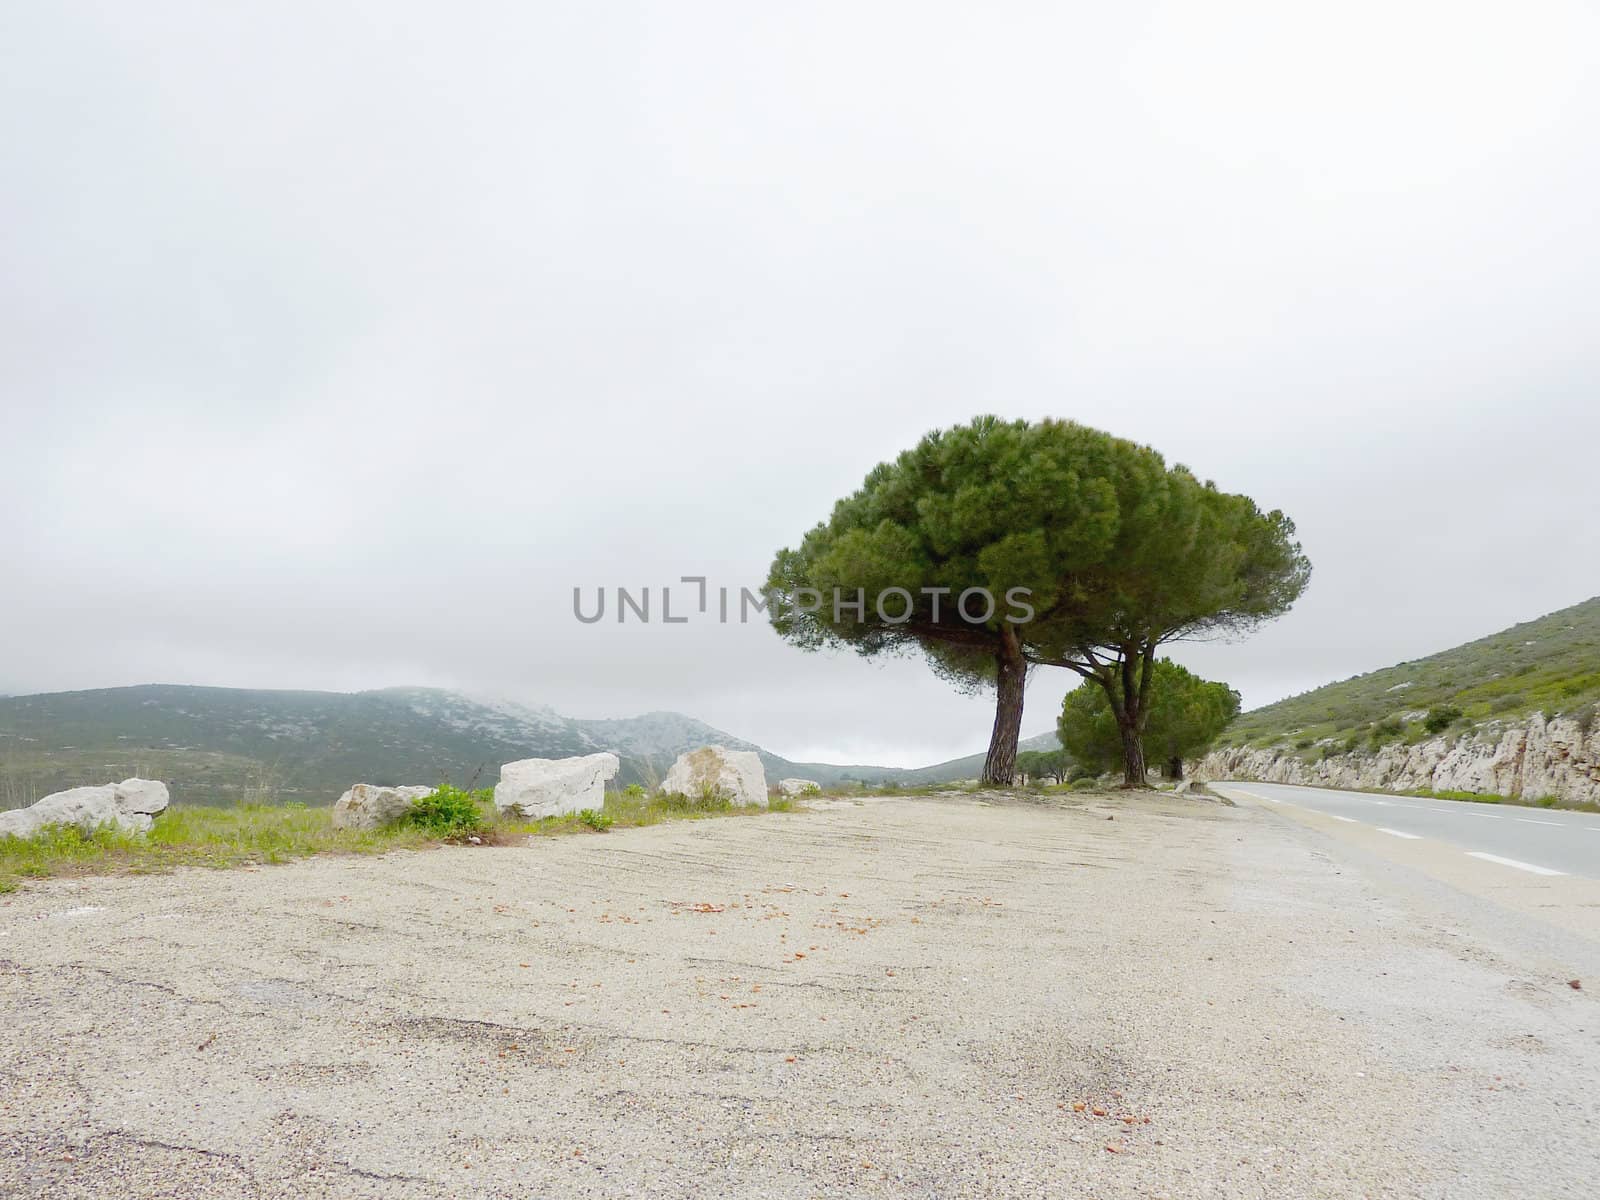 Isolated tree next to a mountain road surrounded by hills, south of France